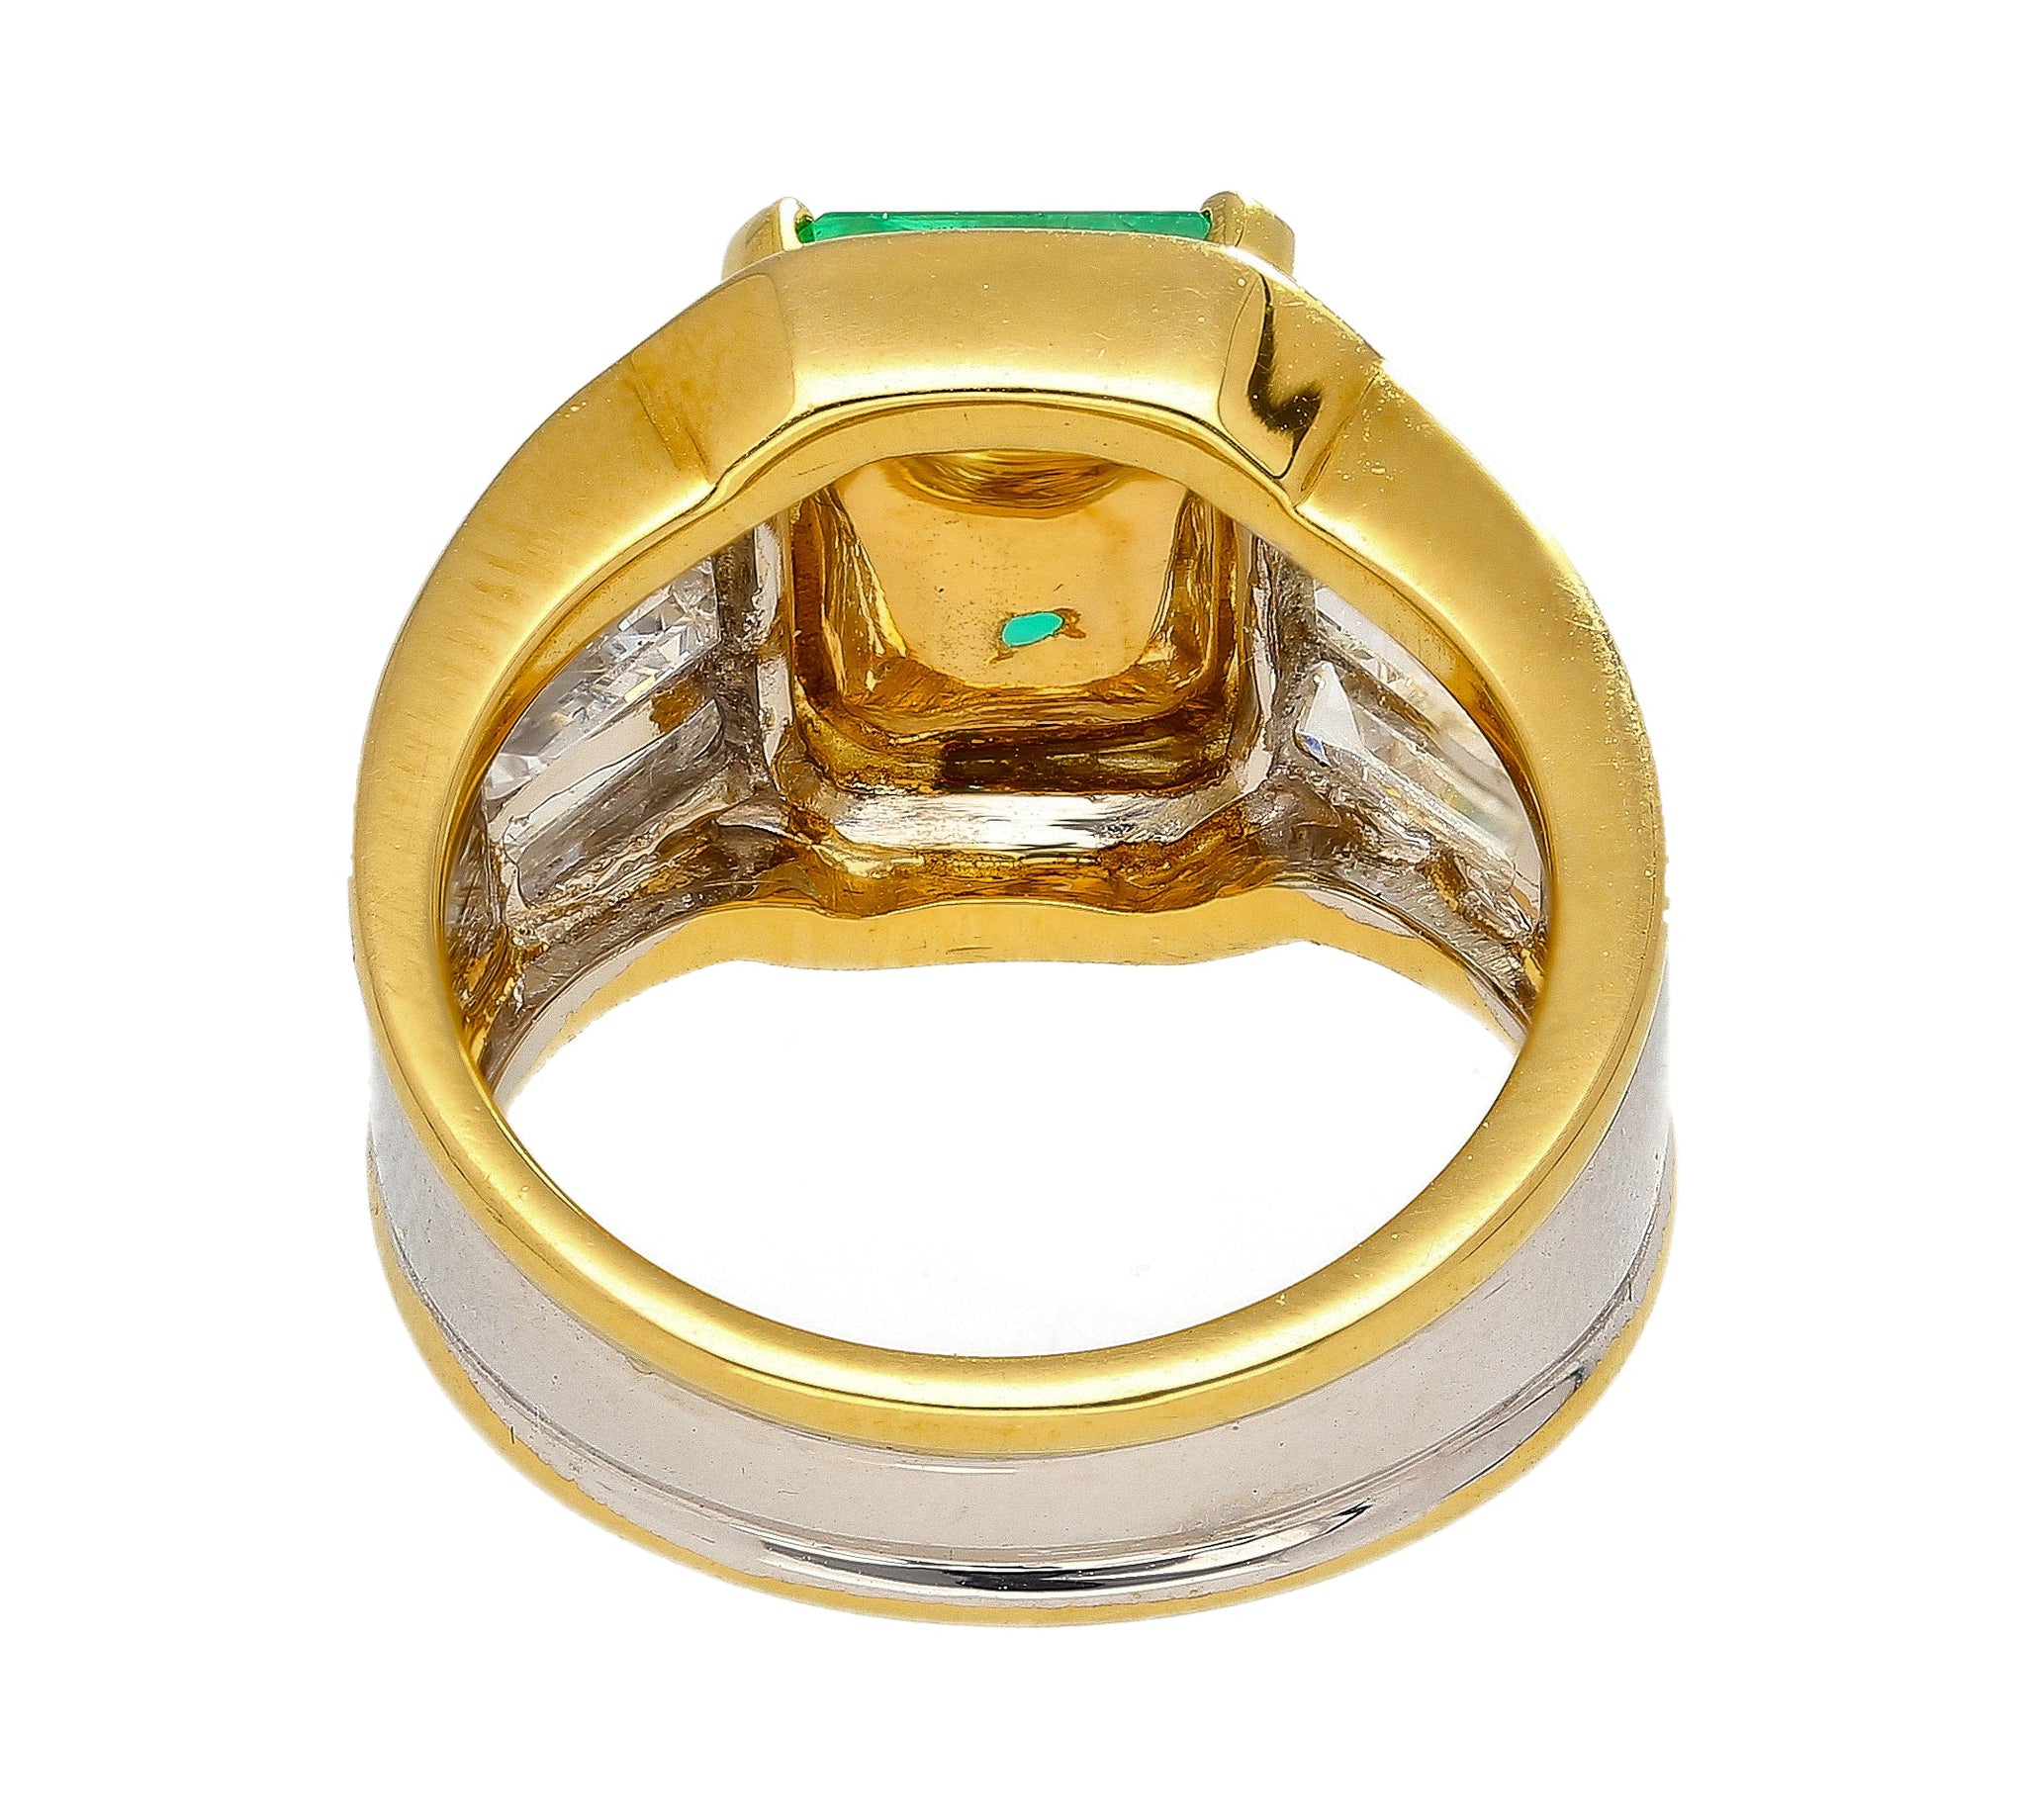 3.16 Carat Colombian Emerald Insignificant Oil Unisex Ring in Platinum & 18K Gold